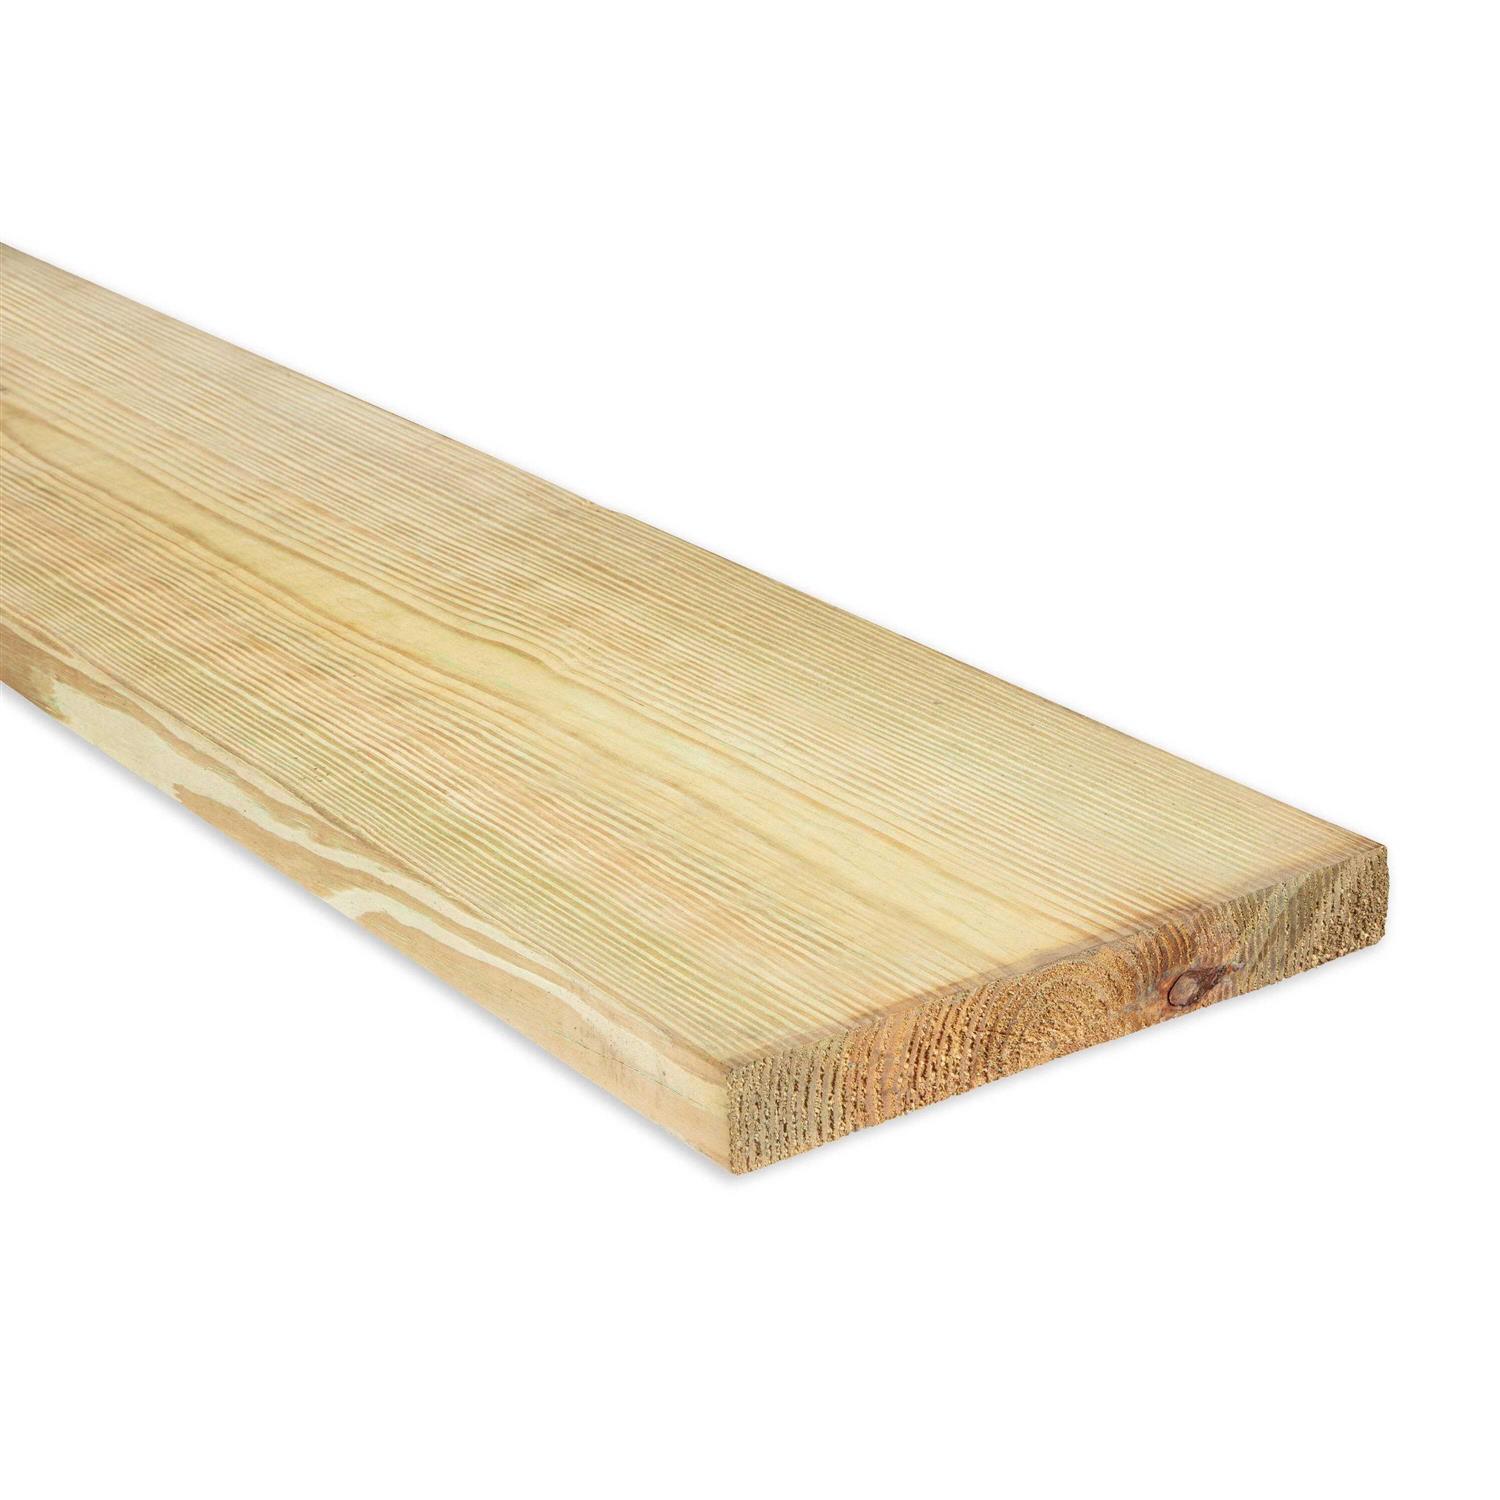 Severe Weather 2 In X 12 In X 16 Ft 2 Prime Southern Yellow Pine